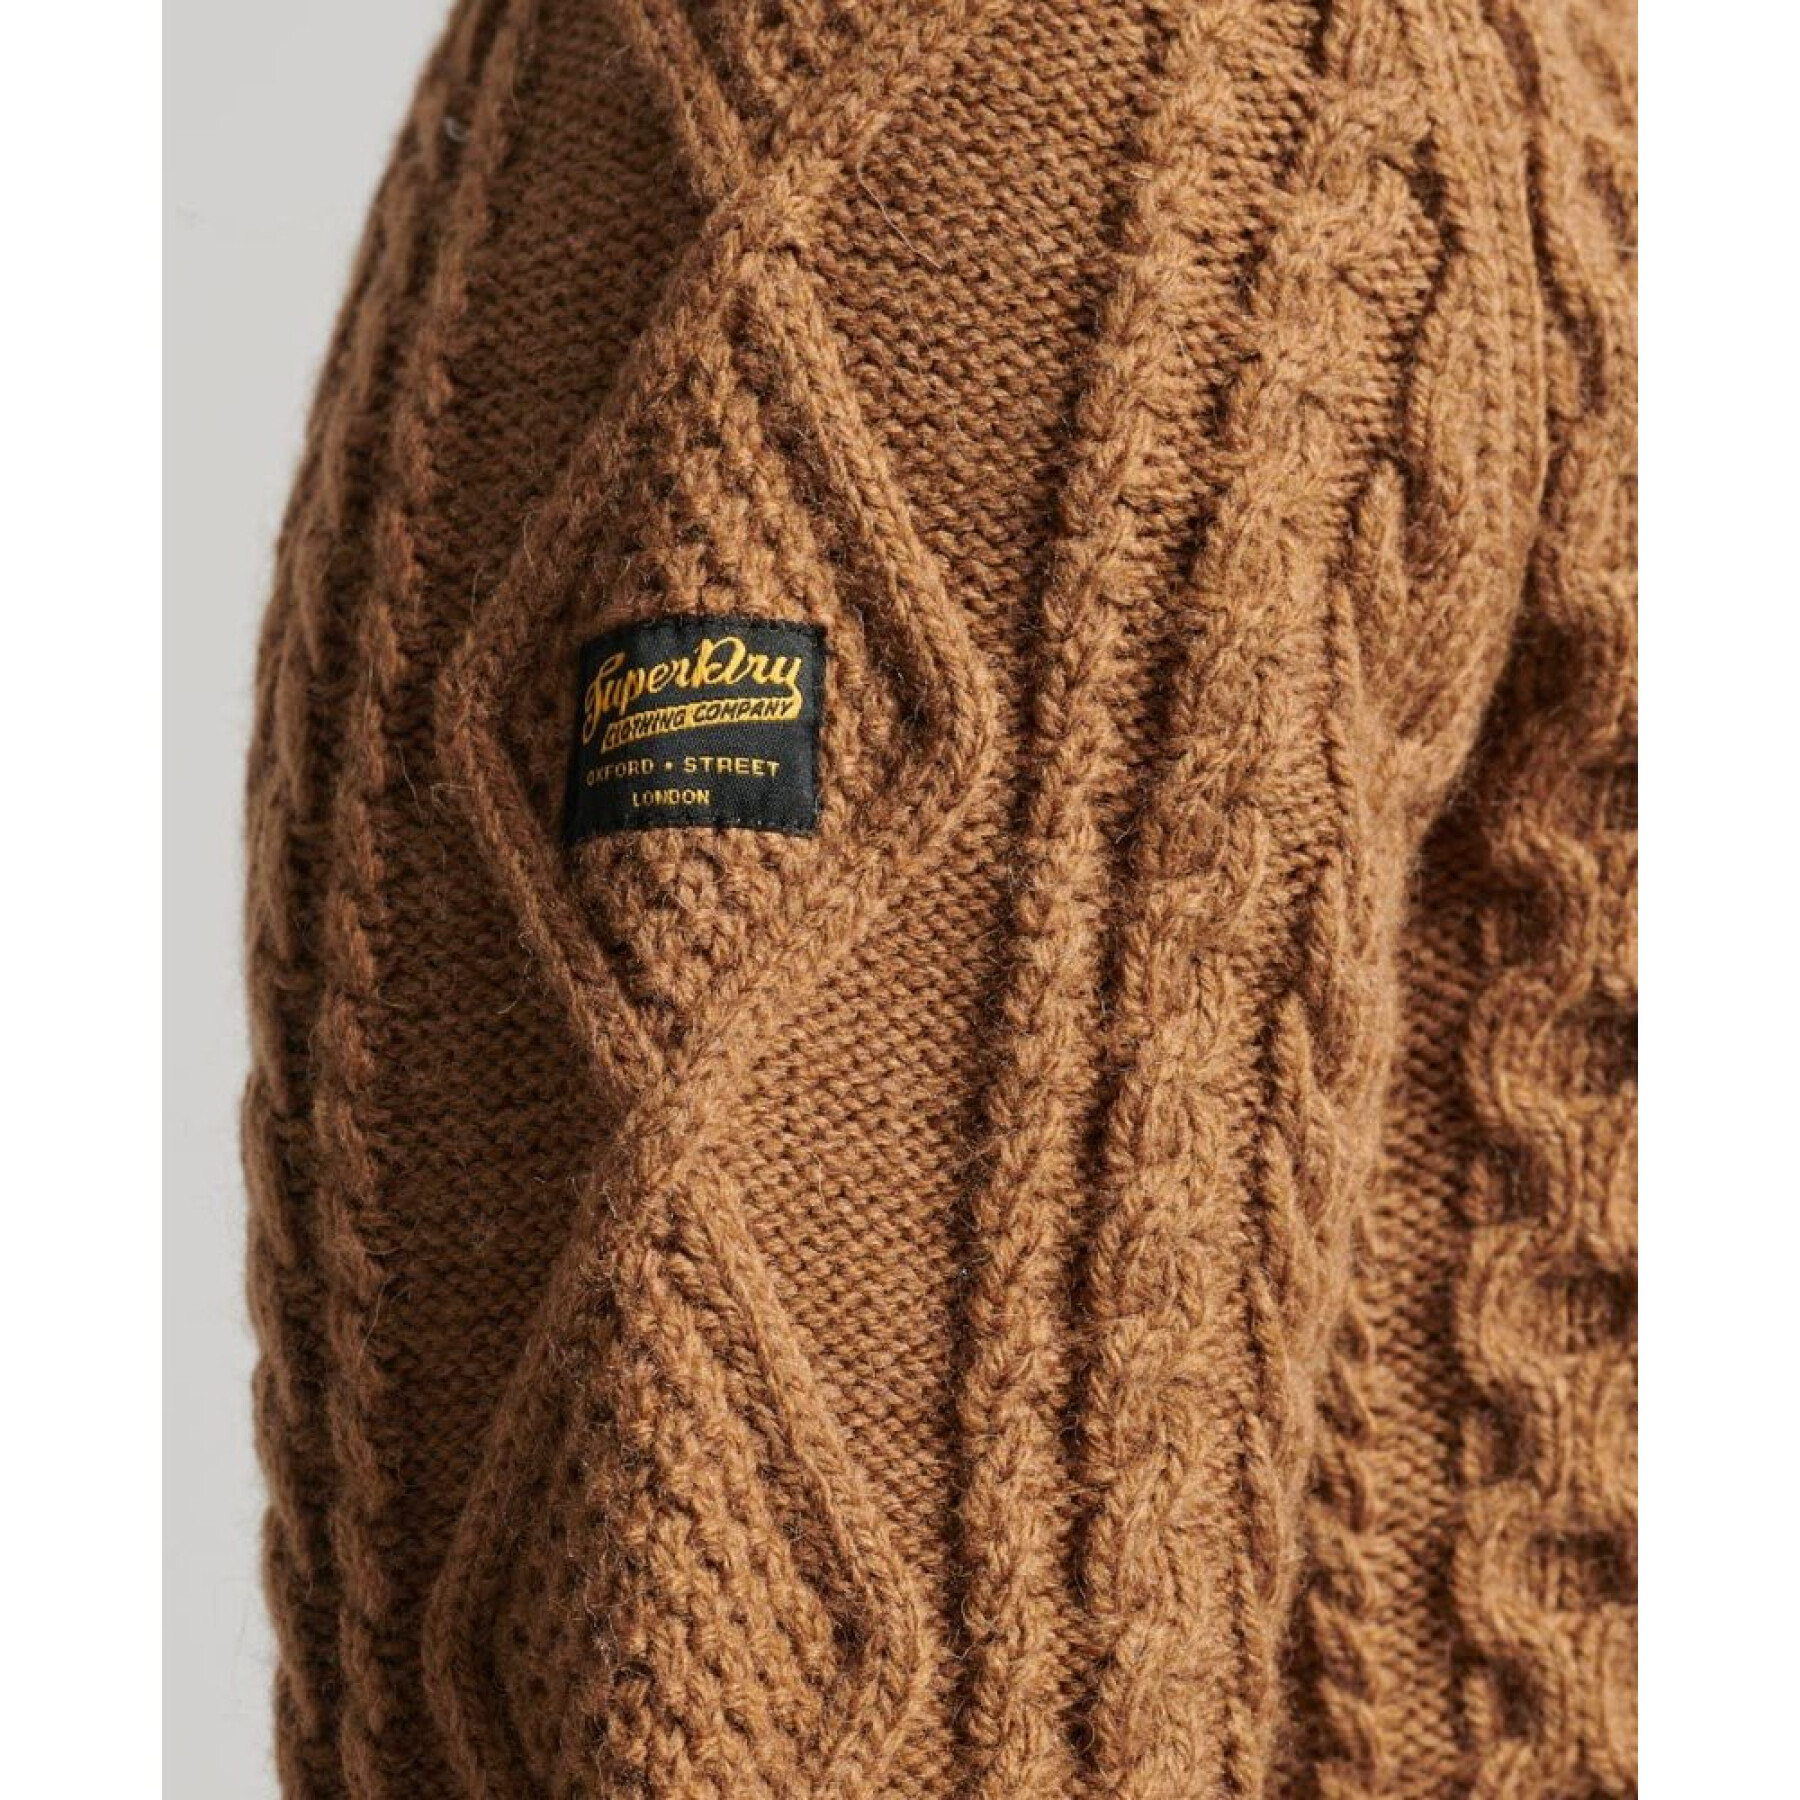 1/2 zip cable knit sweater Superdry Vintage Jacob